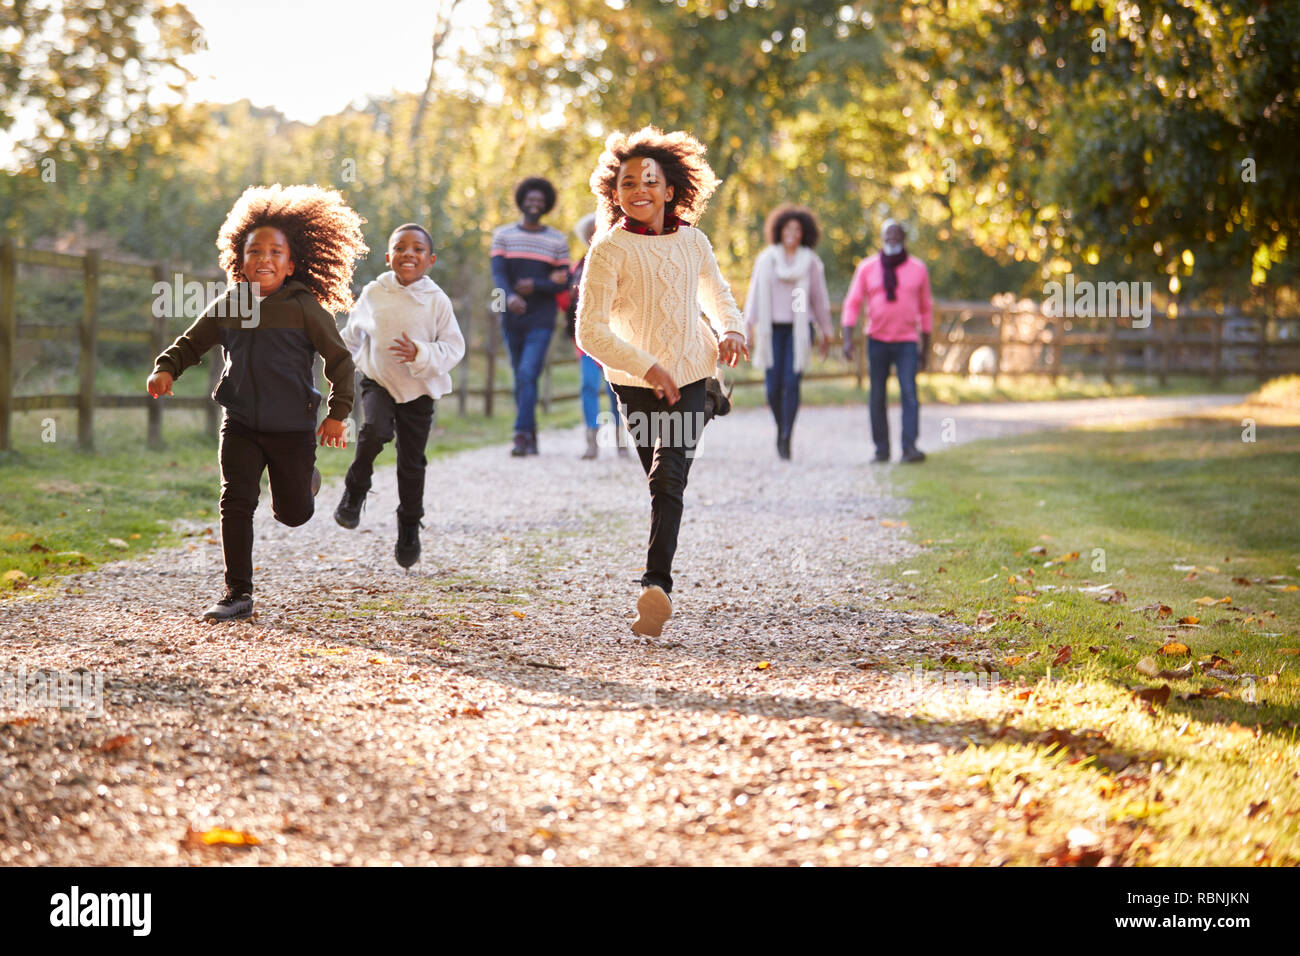 Children Running Ahead As Multi Generation Family Enjoy Autumn Walk In Countryside Together Stock Photo